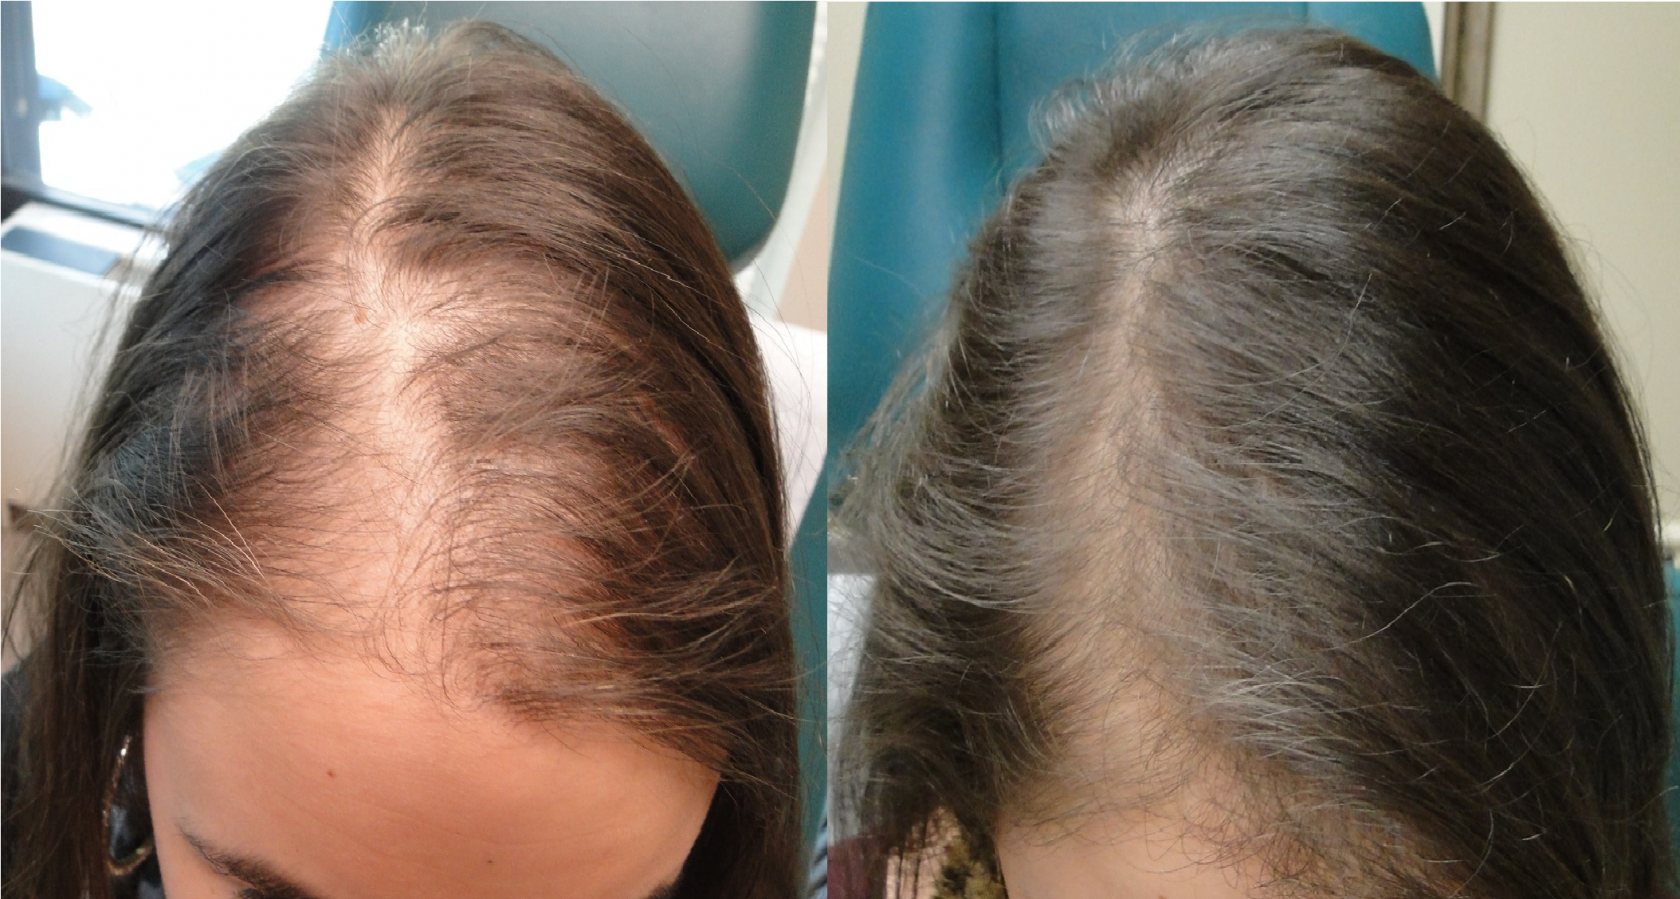 Example of hair loss treatment (before and after)